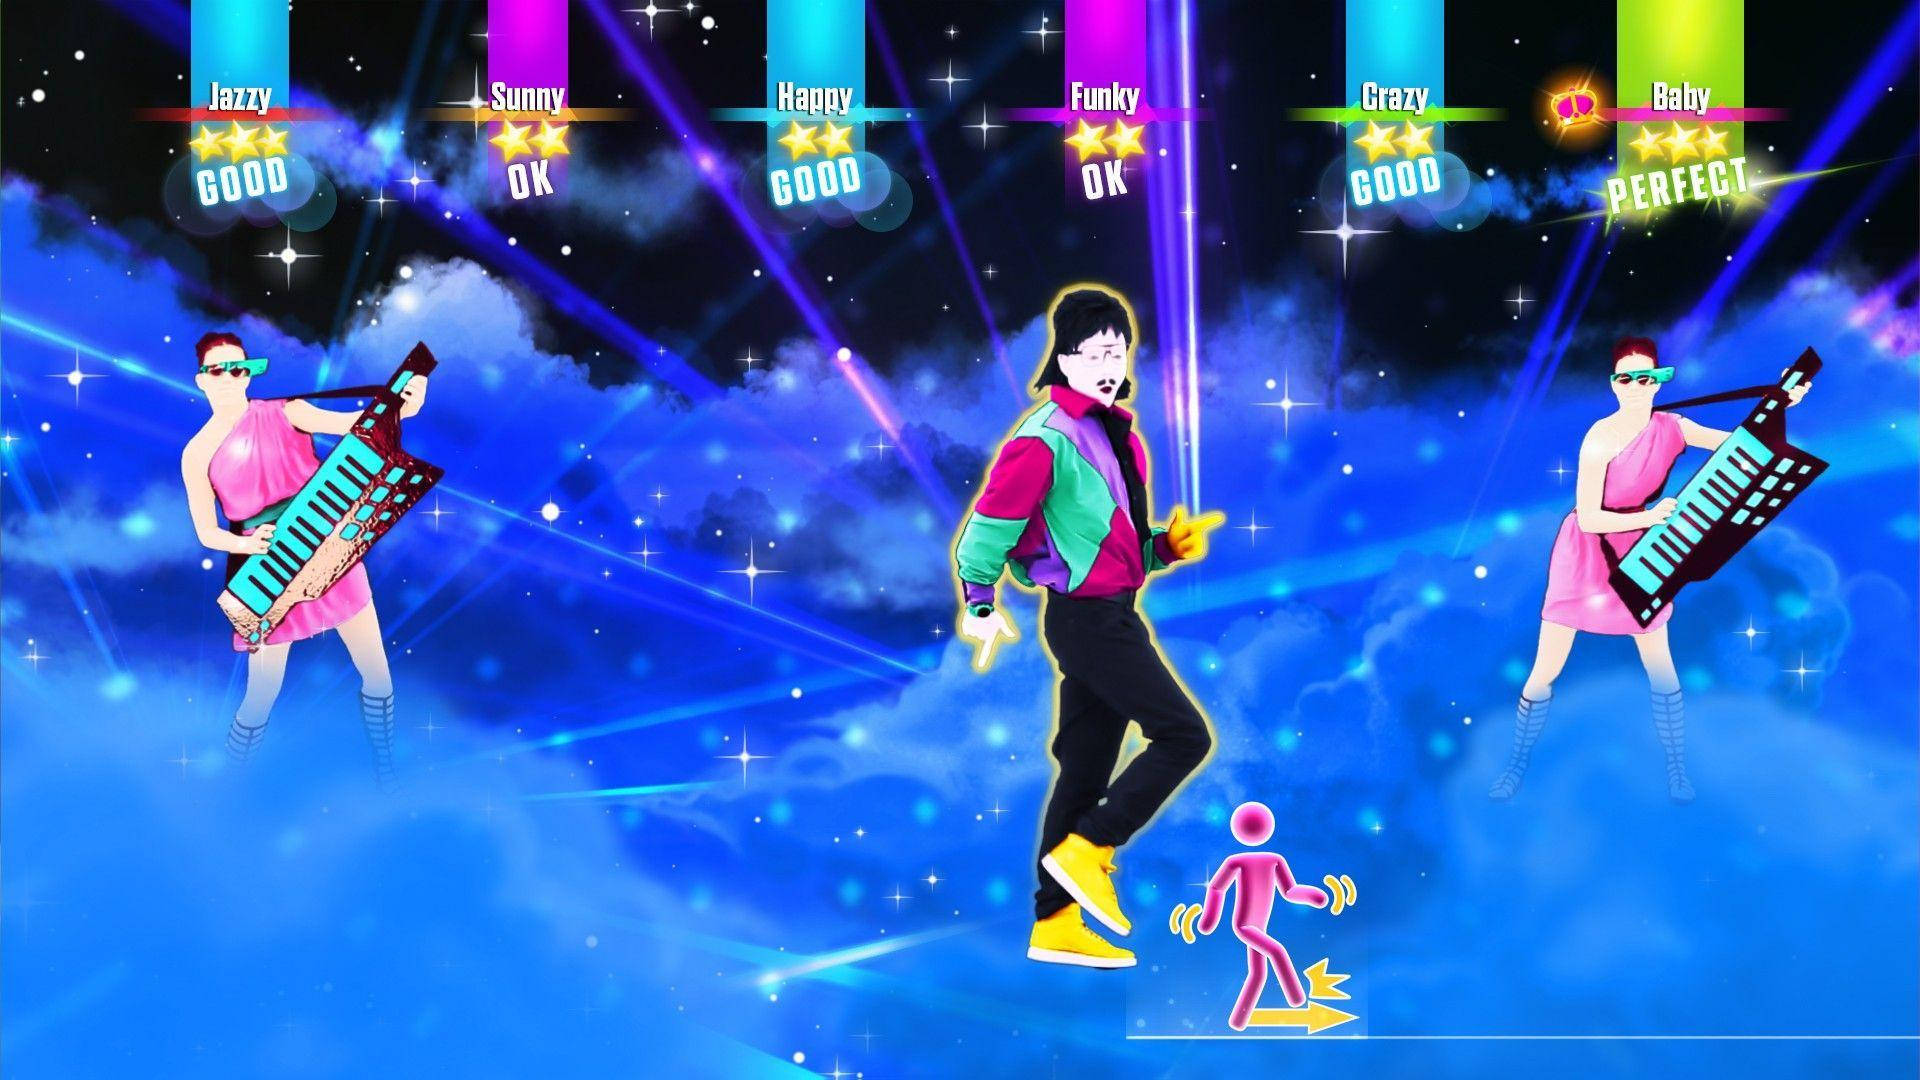 Just Dance 2017 Dancers With Keytar Players Background